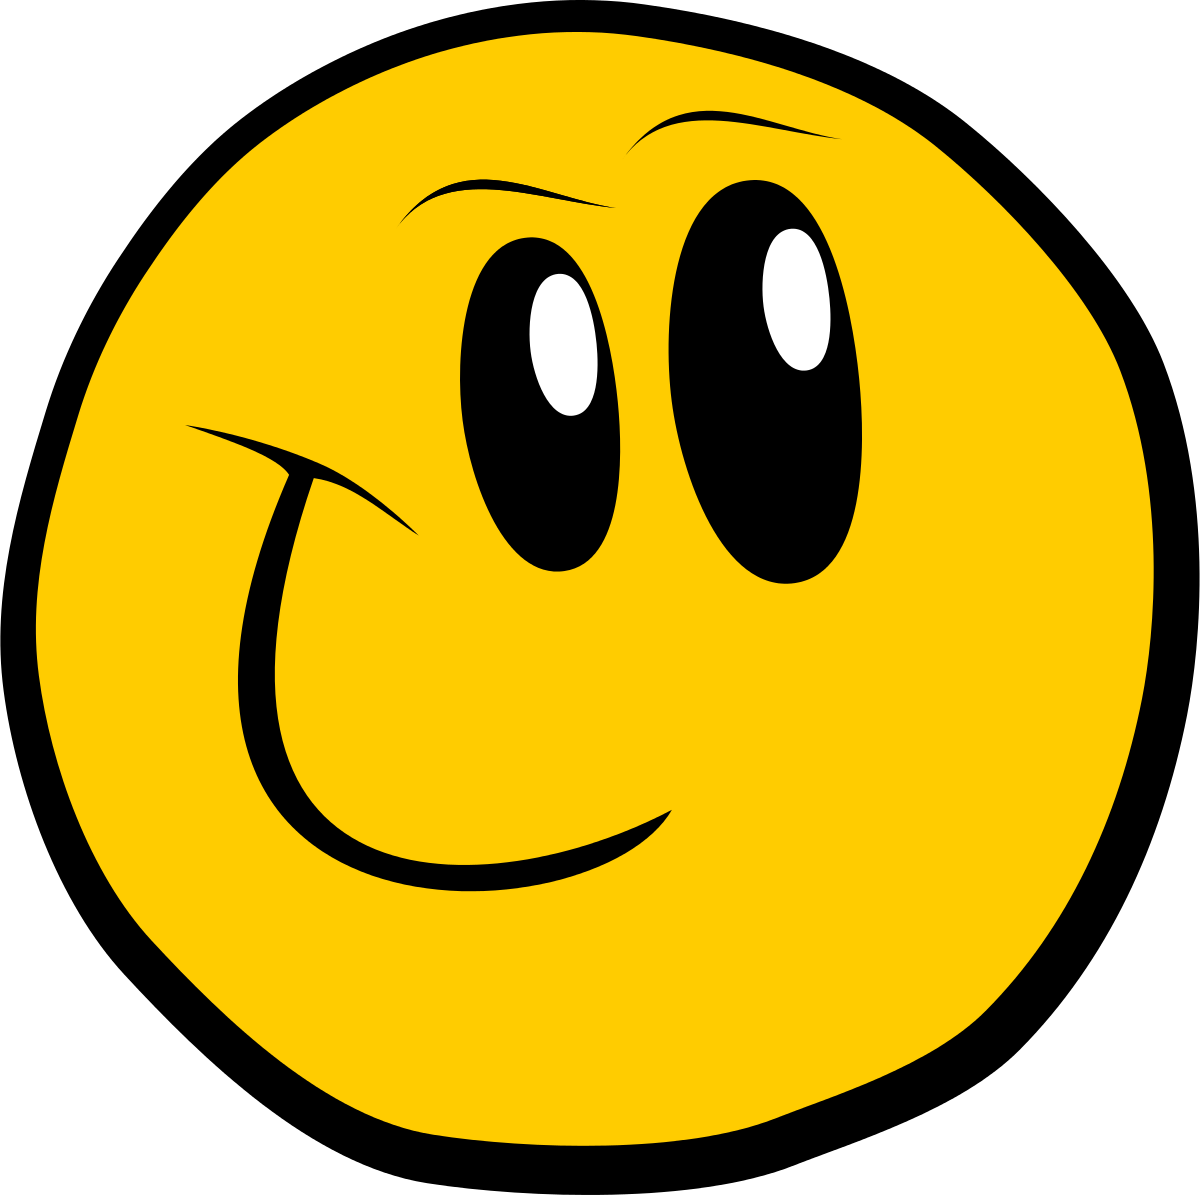 Smile smiling clipart.